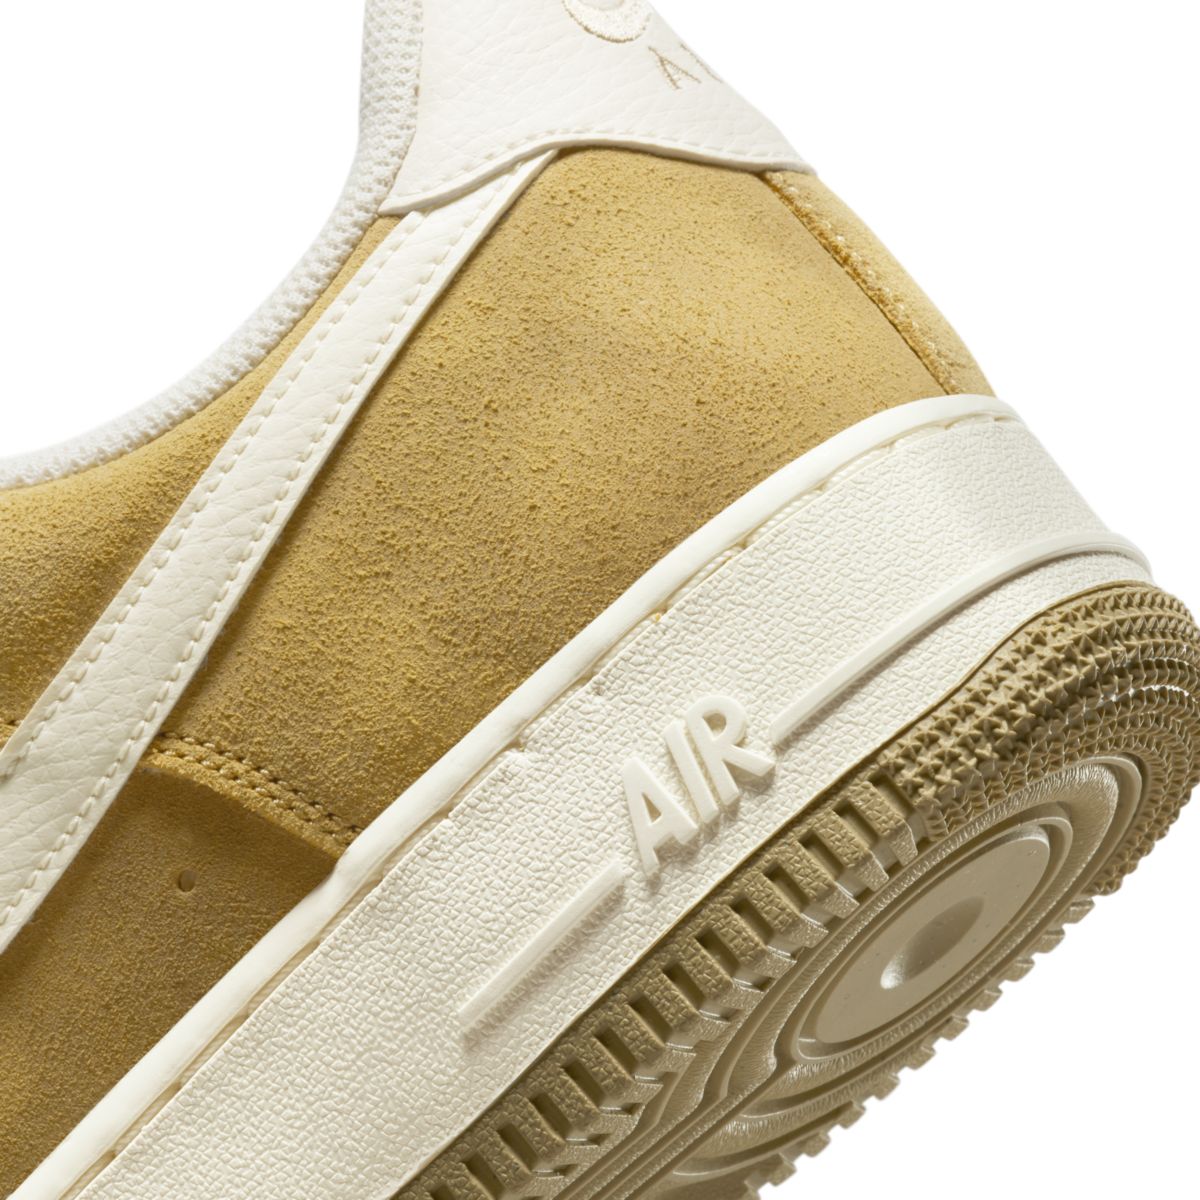 Nike Air Force 1 Low Gold Sail Suede DV6474-700 8